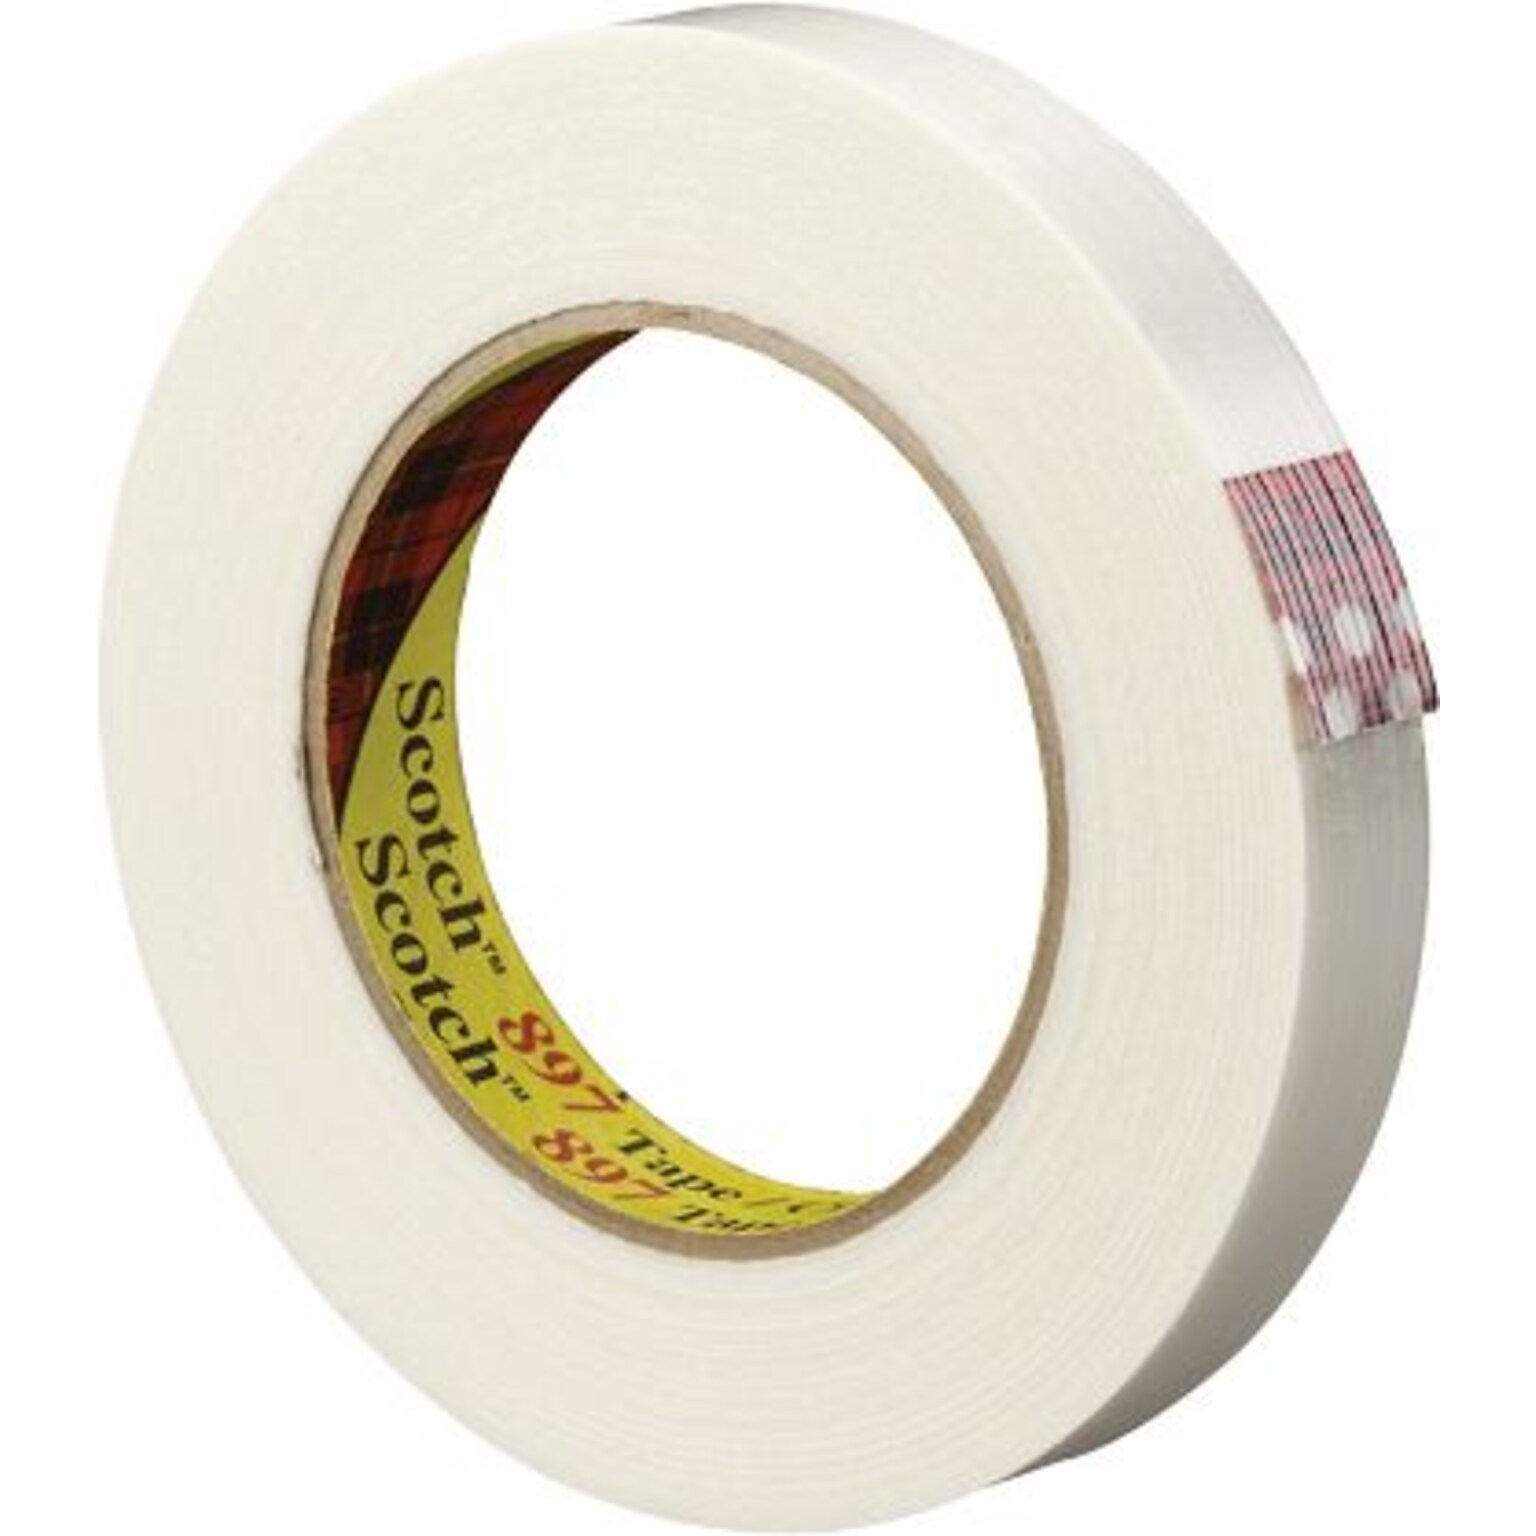 3M 897 6.0 Mil Strapping Tape, 1 x 60 yds., Clear, 12/Case (T91589712PK)